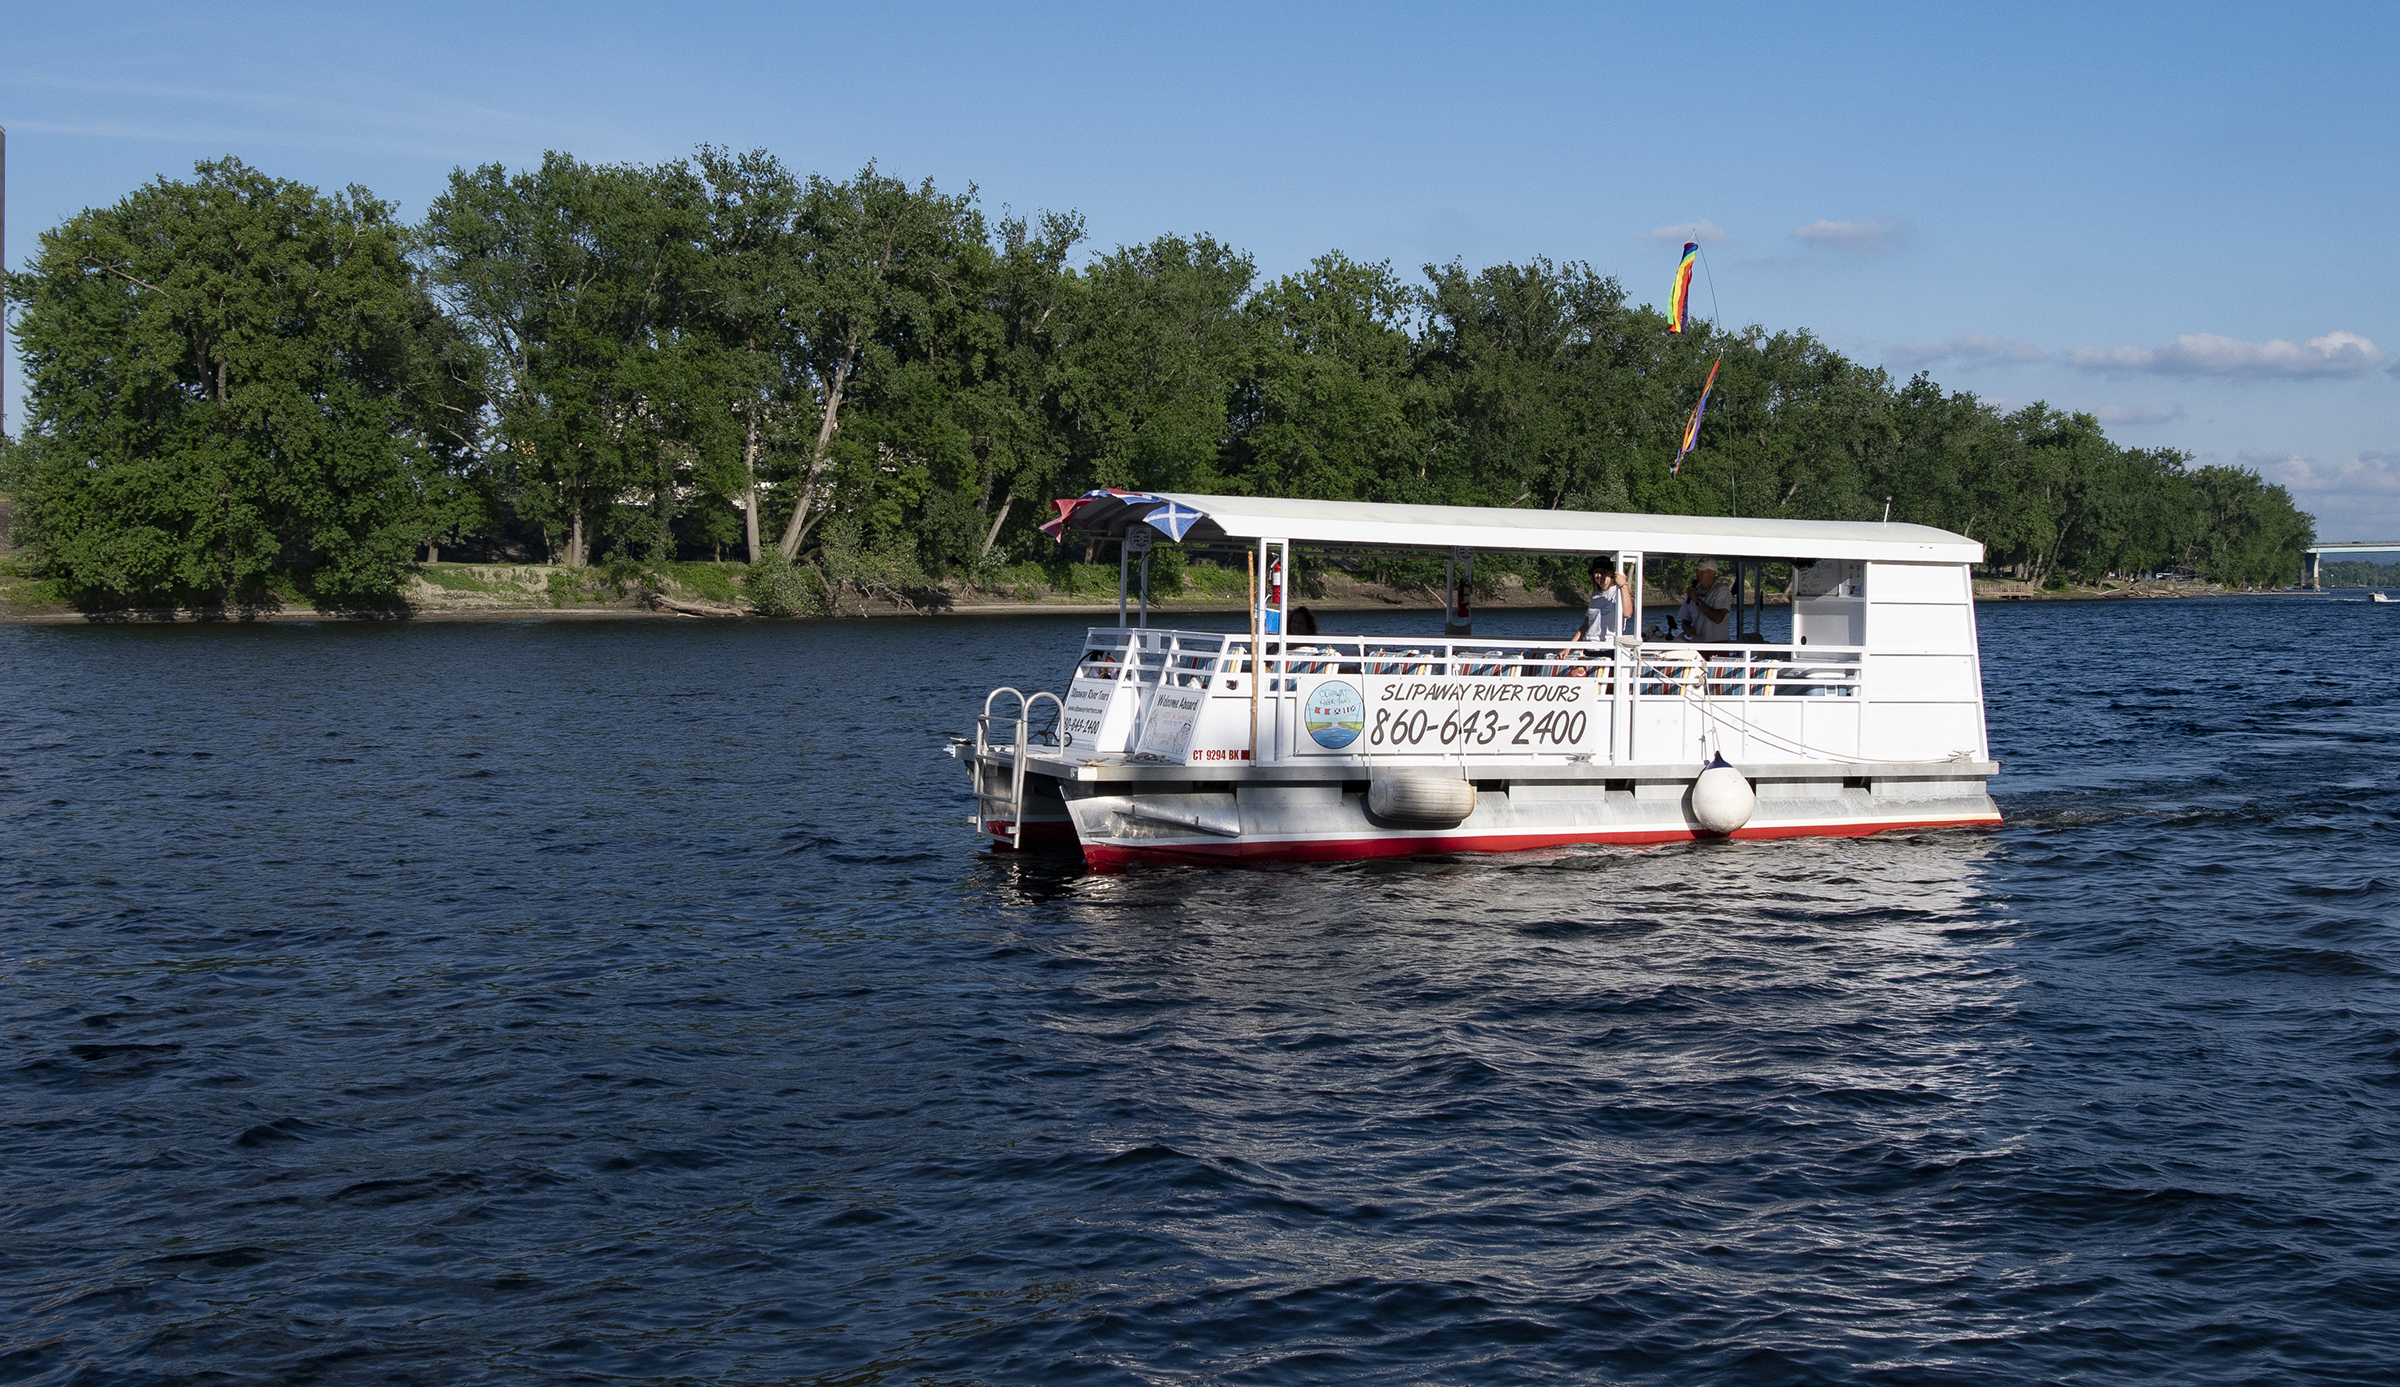 Tour the Connecticut River on Slipaway Tours